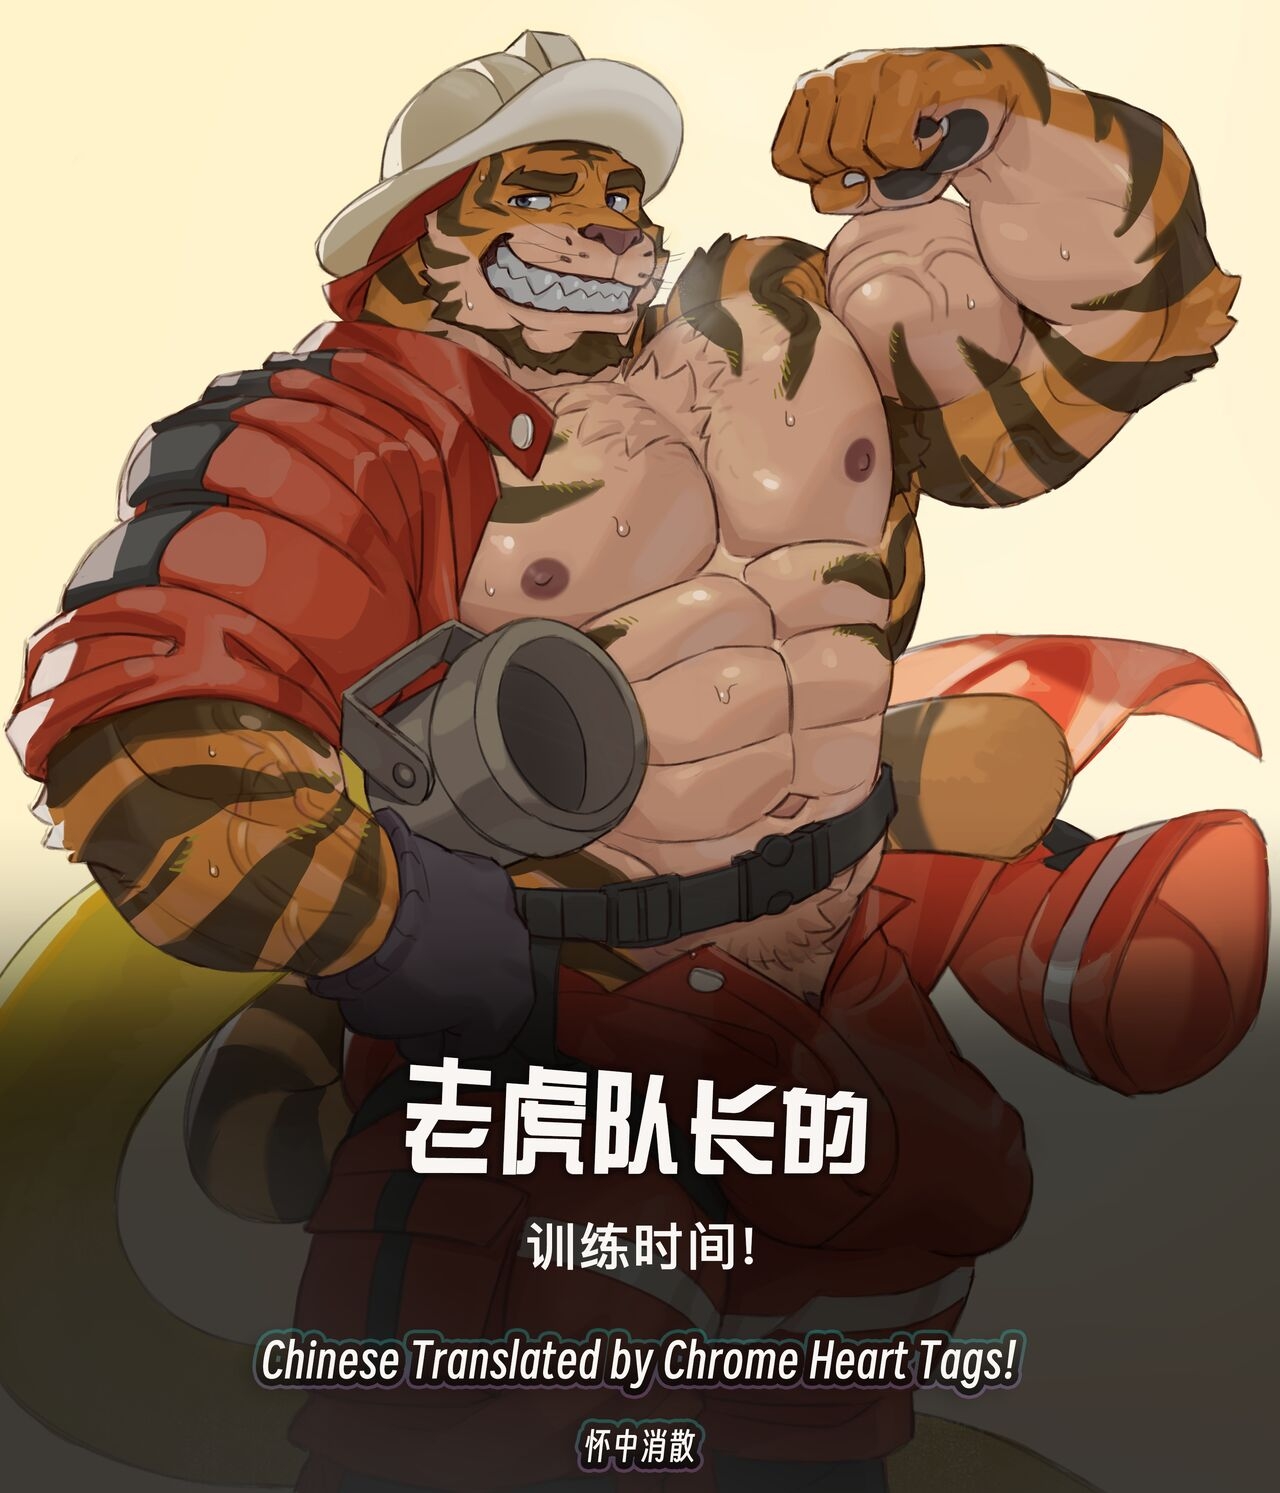 [Imatoart] Tiger Fire Chief's Training Session | 老虎消防队长的训练时间! [Chinese][Translated by Chrome Heart Tags] 0